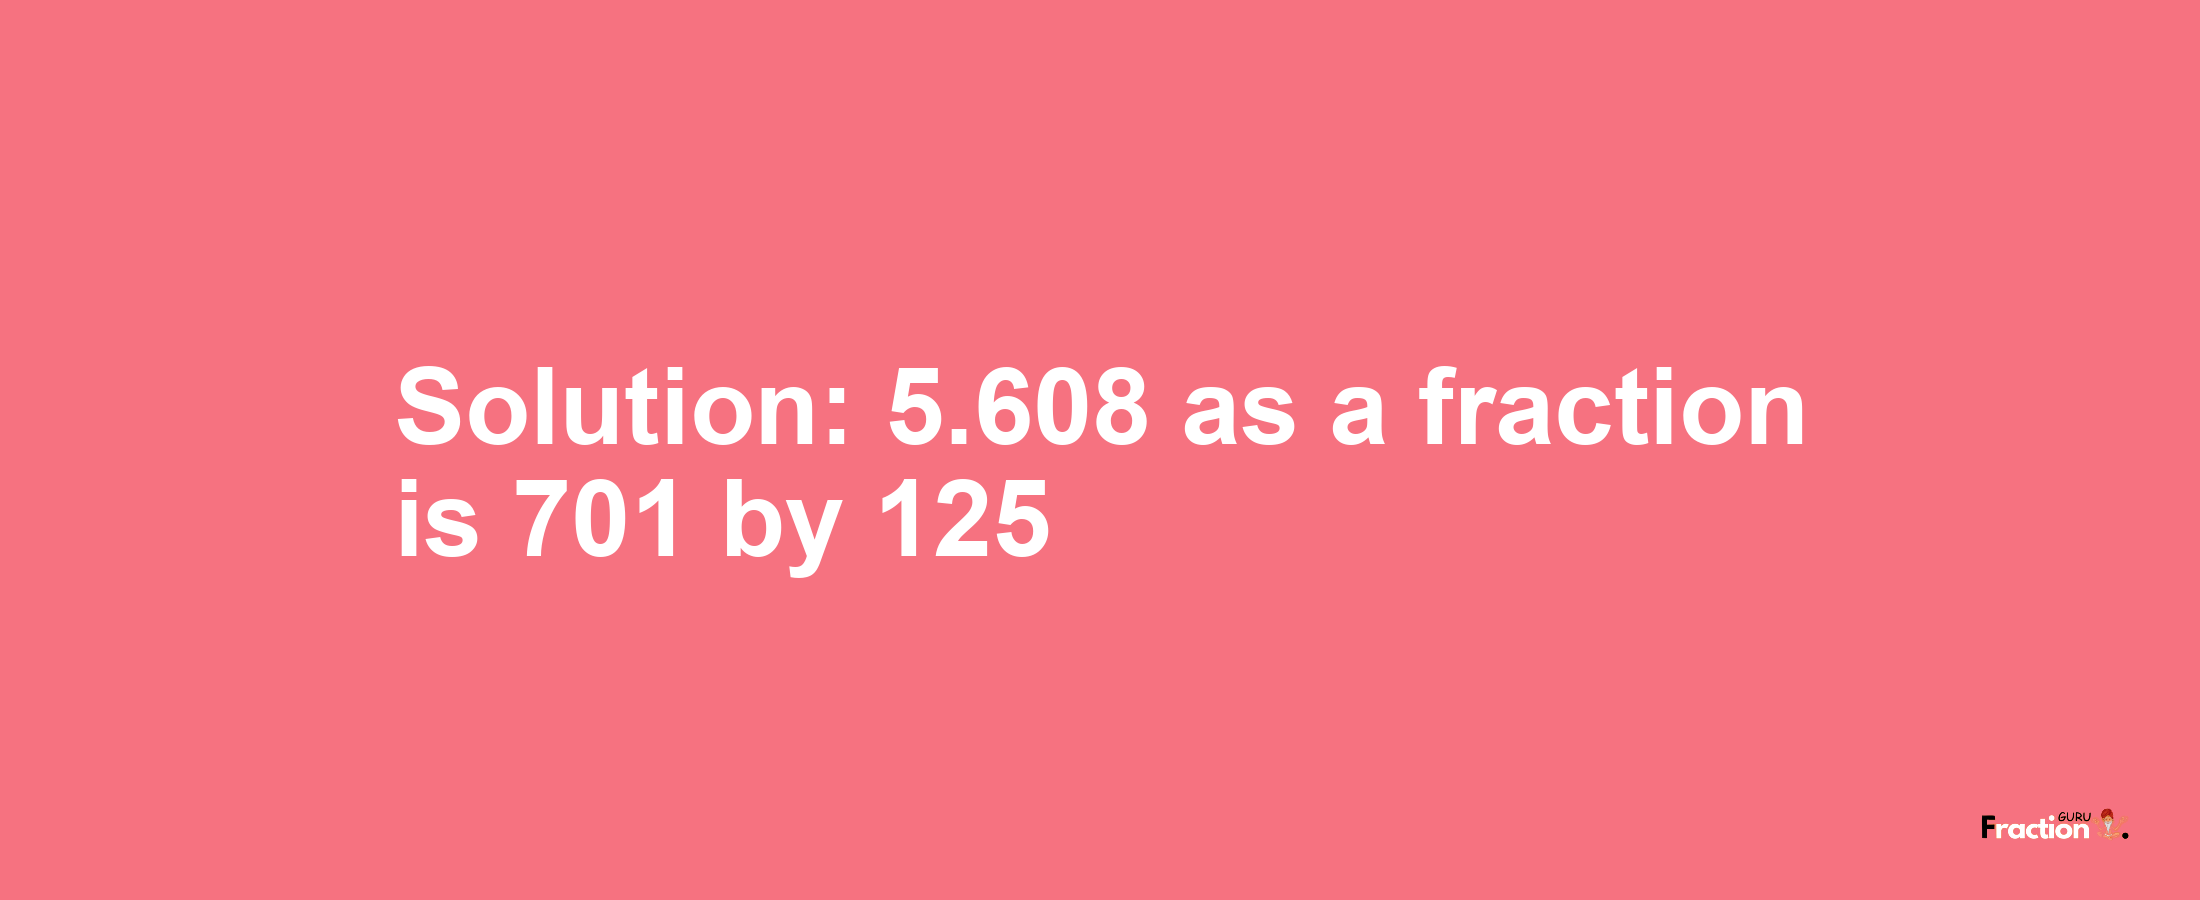 Solution:5.608 as a fraction is 701/125